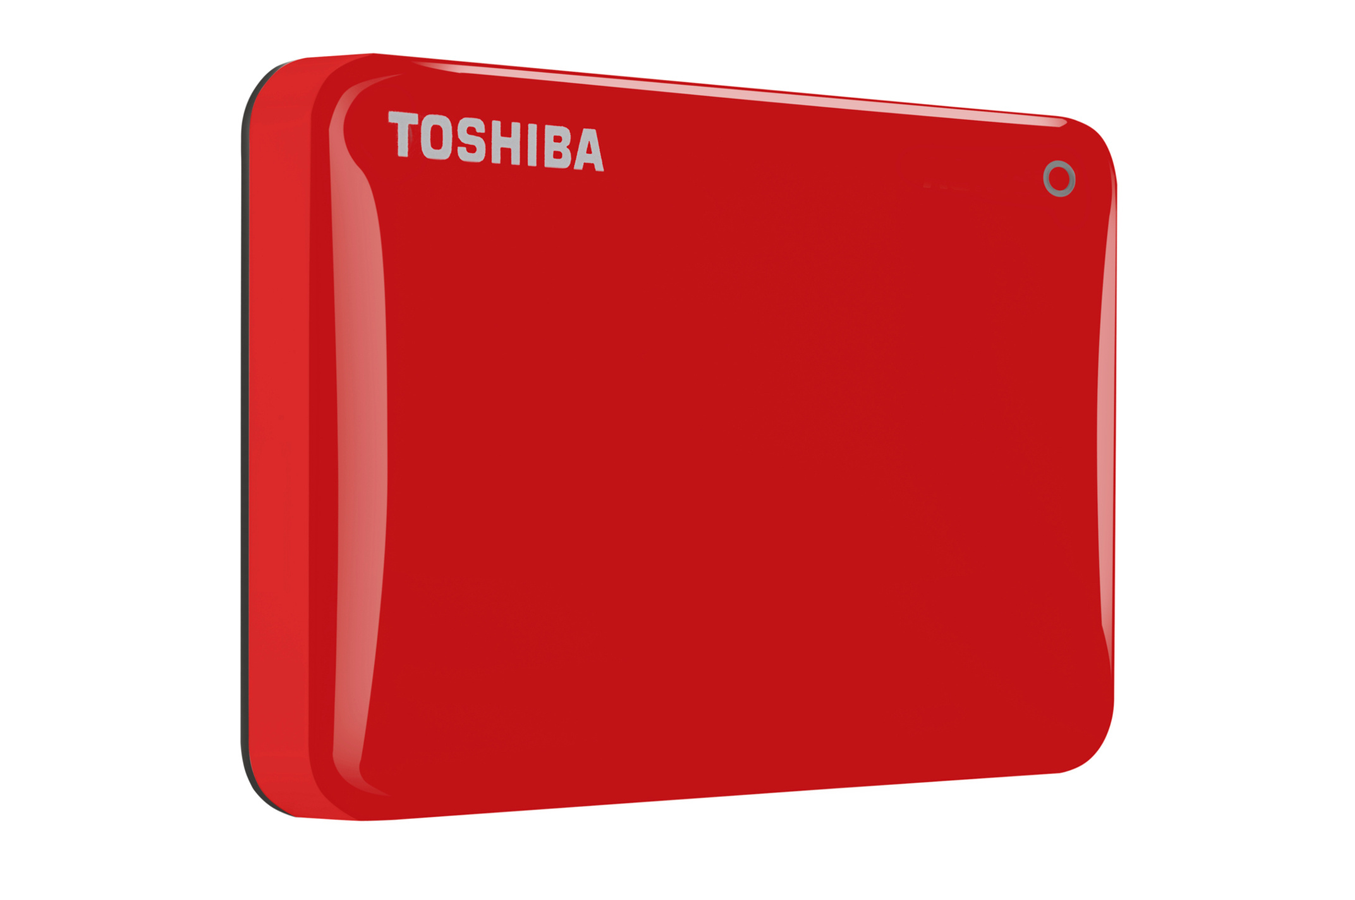 Disque dur externe Toshiba CANVIO CONNECT II 1TB RED (4089430) | Darty